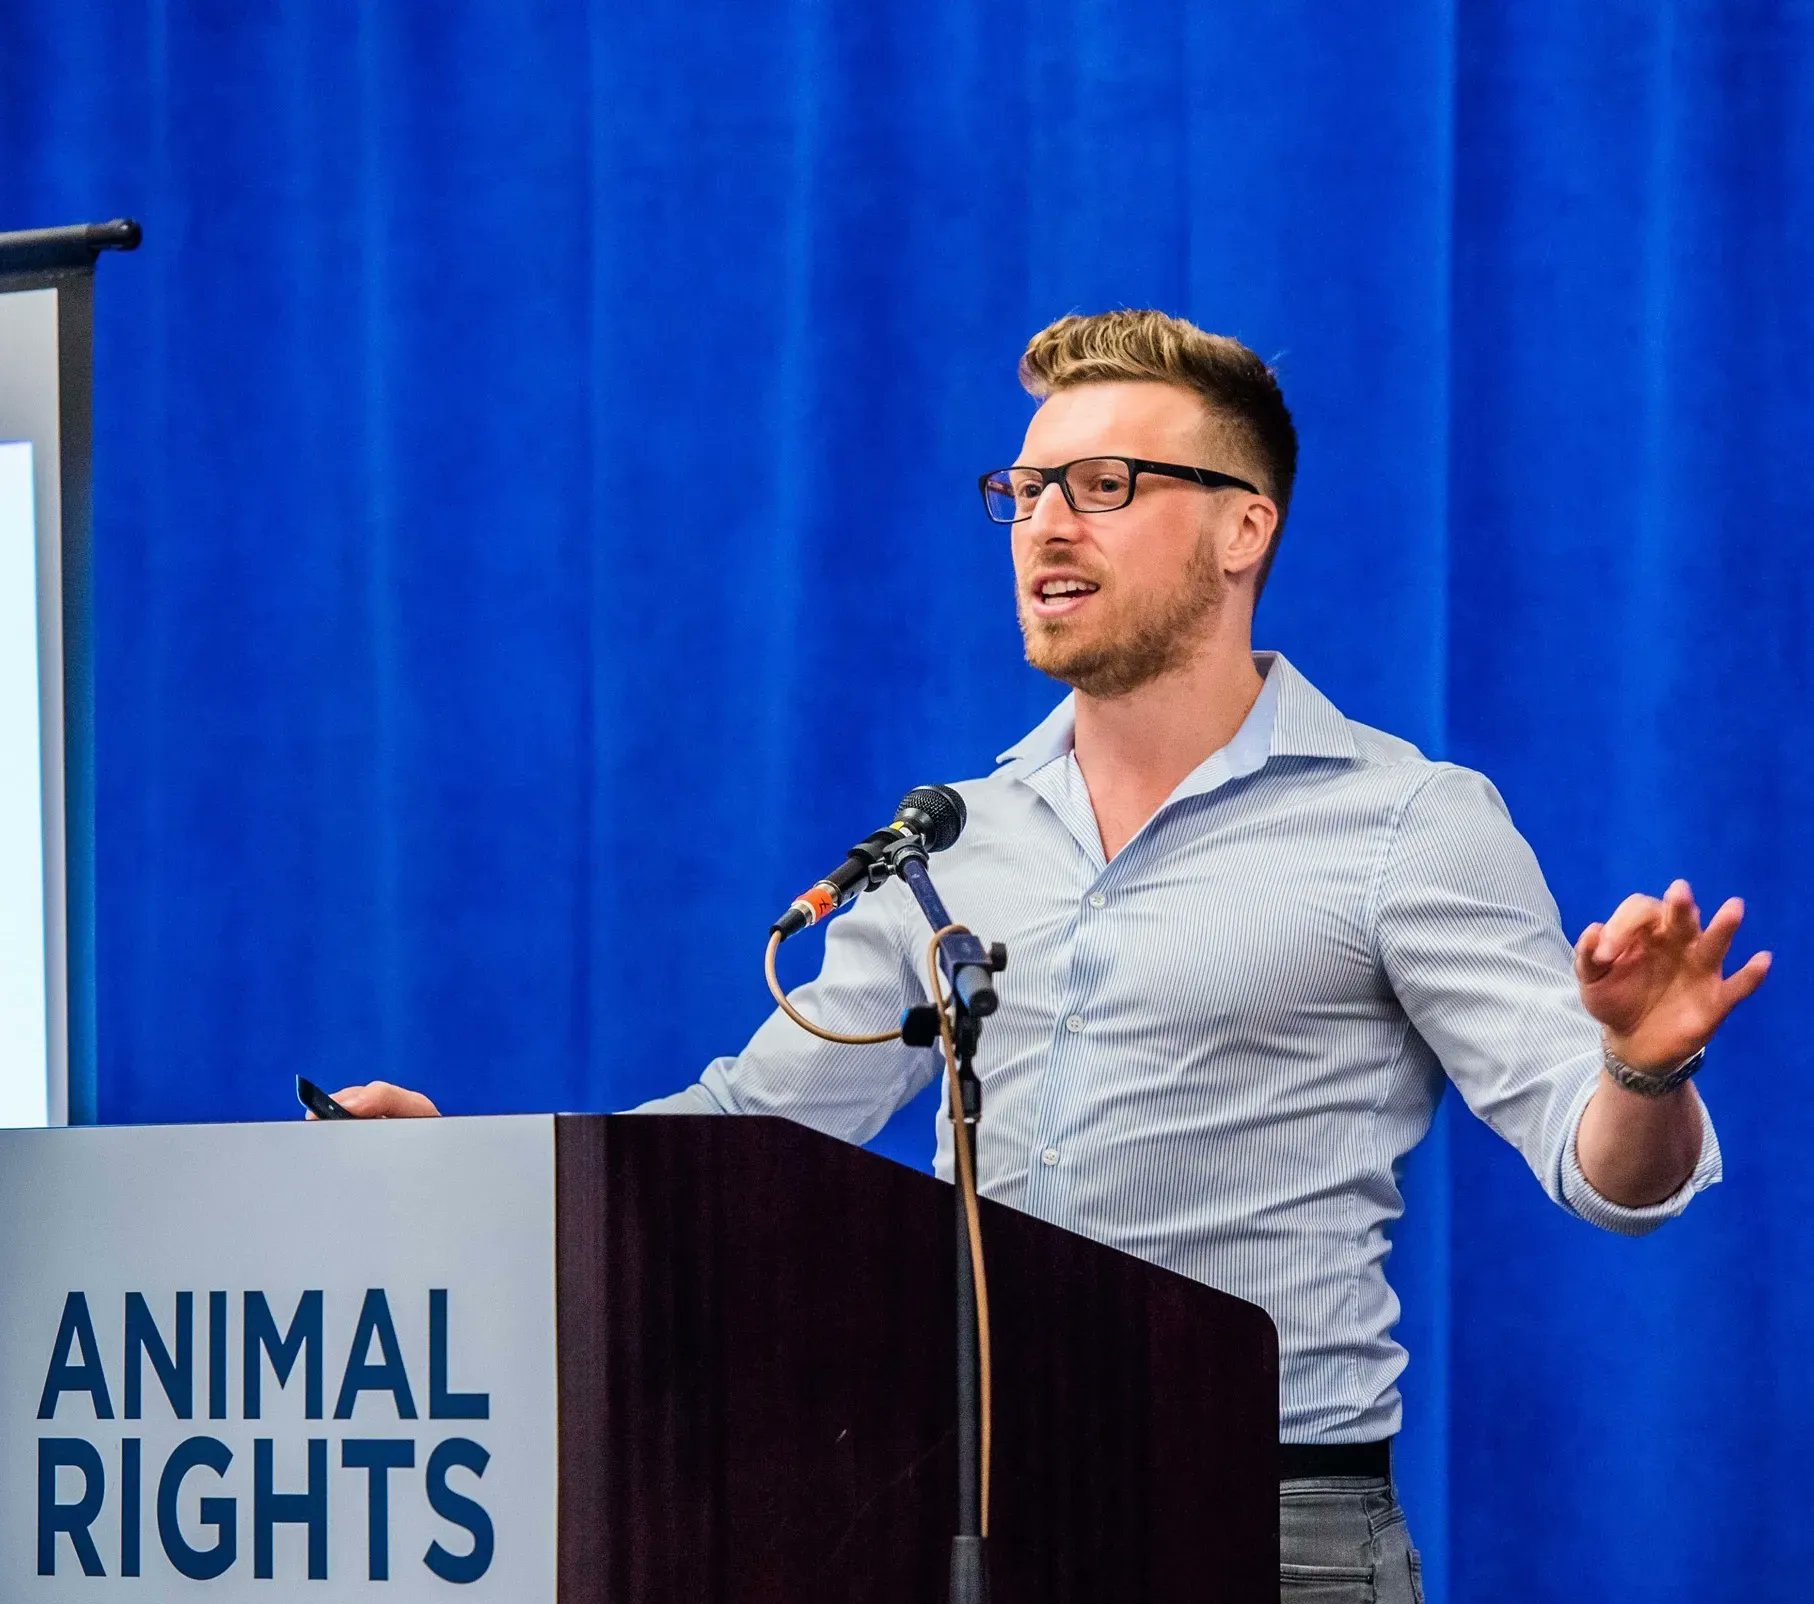 John Oberg speaking at an event in support of the animals.